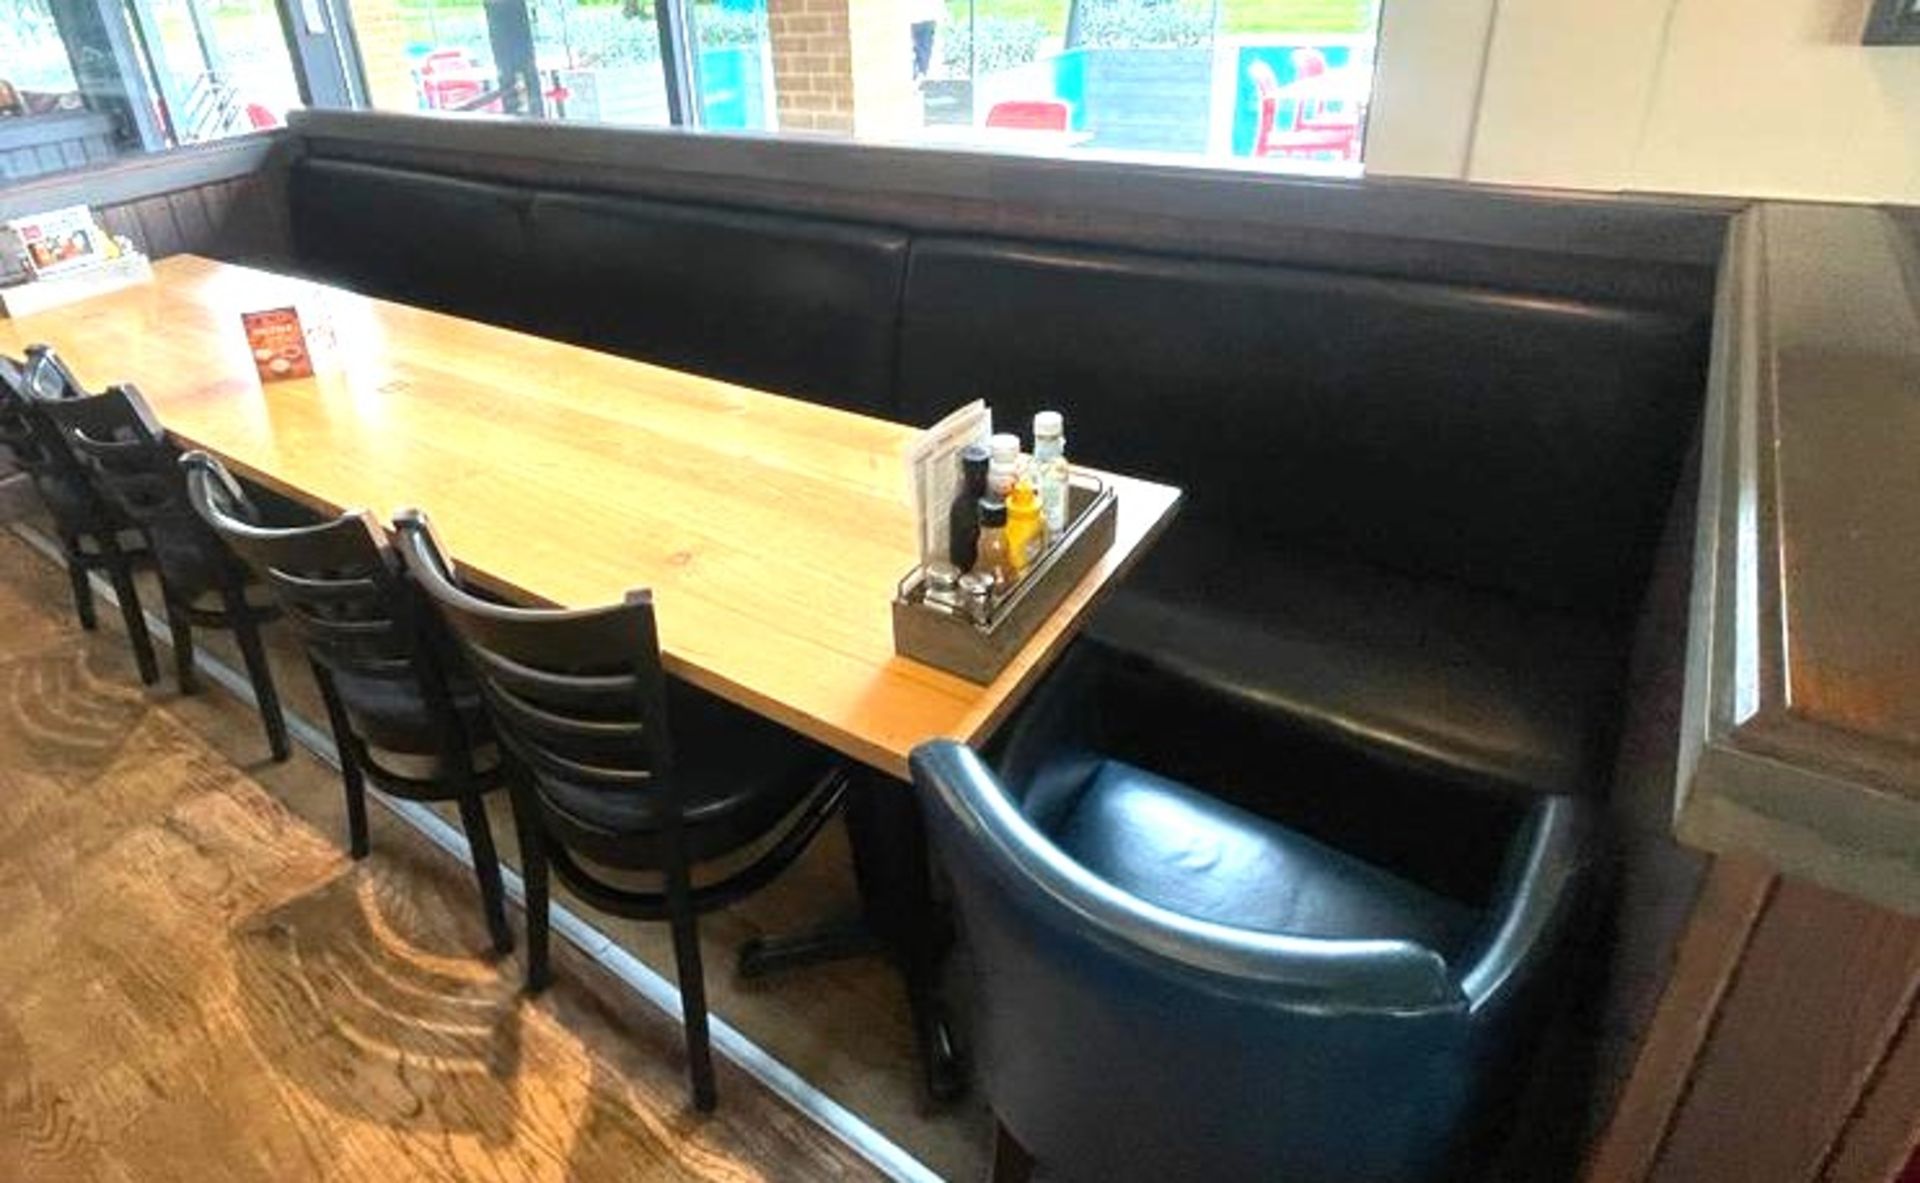 1 x Restaurant Seating Bench With a Black Faux Leather Upholstery - Approx 12ft in Length